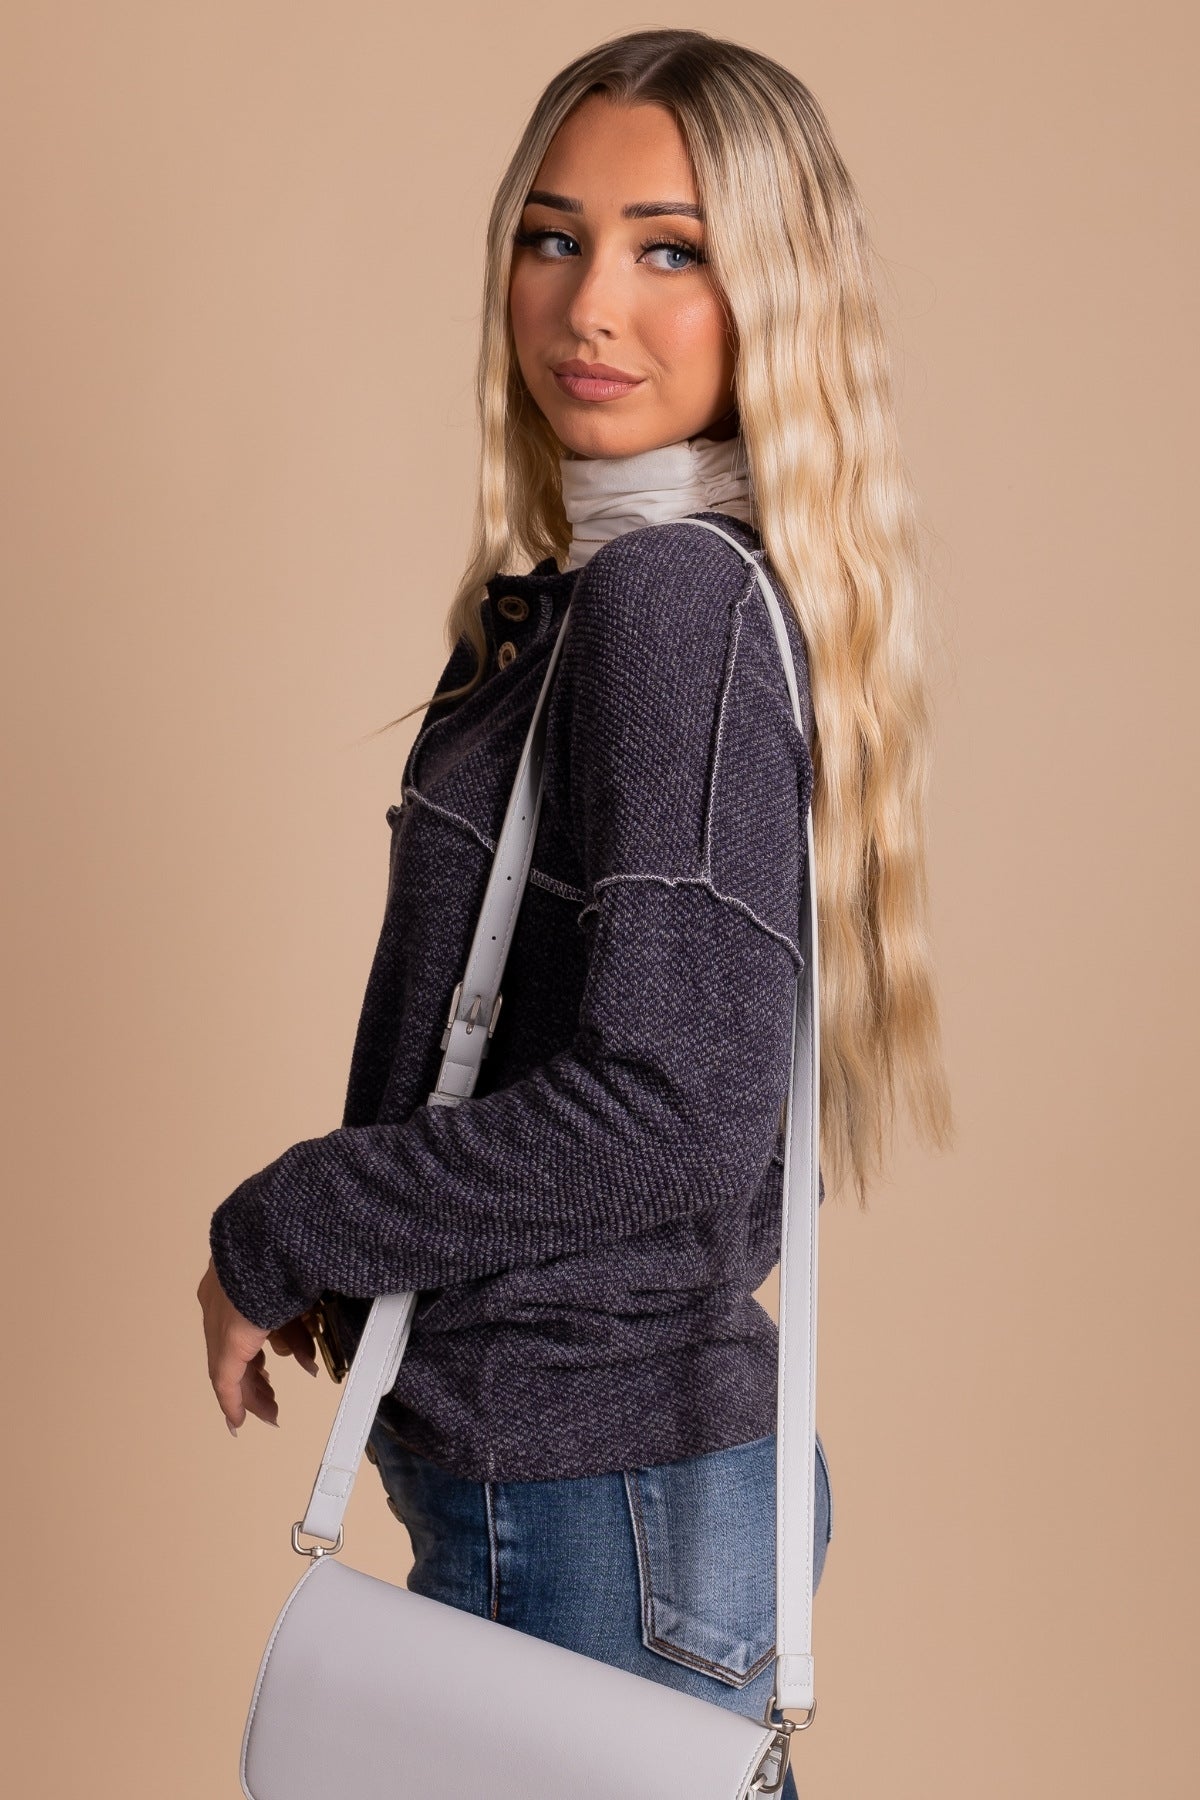 Women's Charcoal Gray Knit Top for Fall